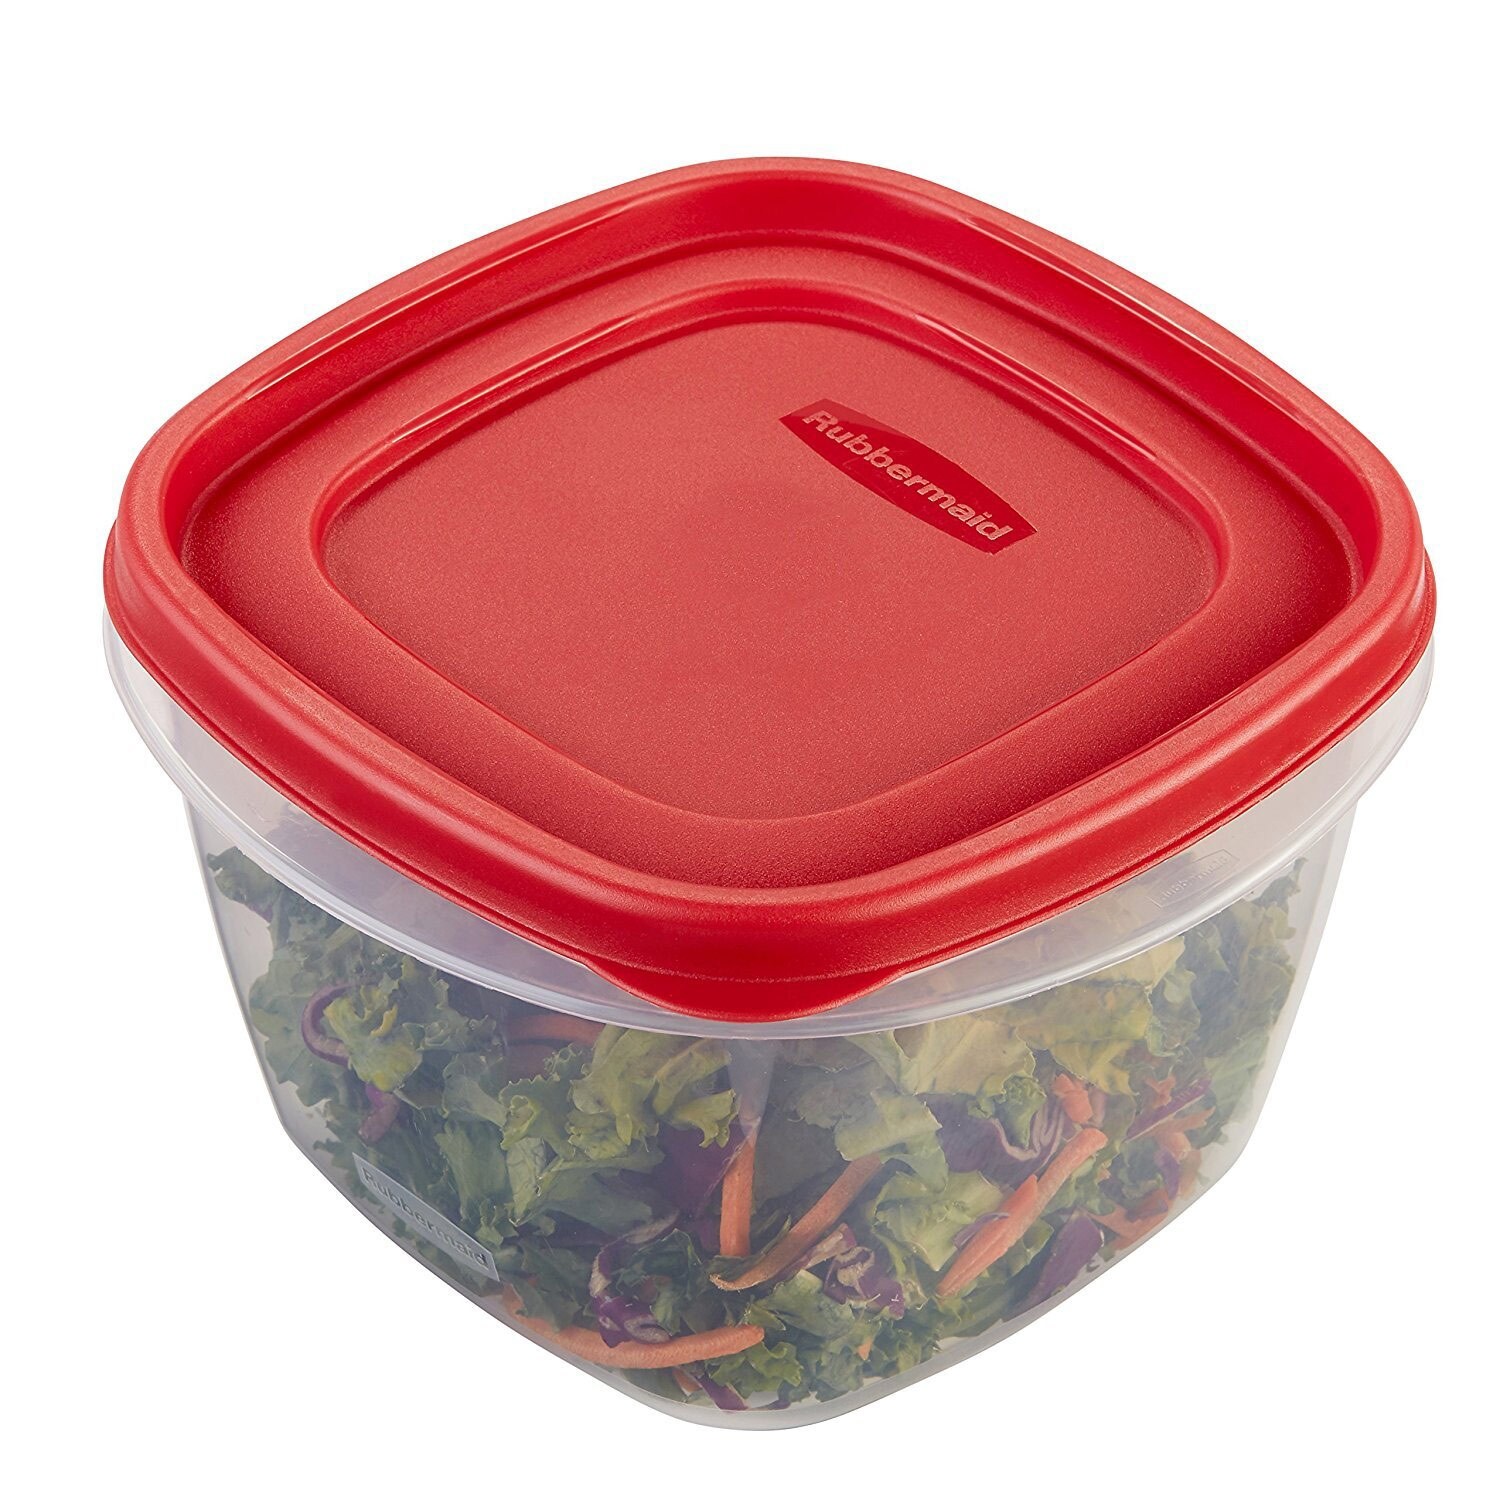 https://ak1.ostkcdn.com/images/products/is/images/direct/30cc00cefe6f89be72c25df36c8e880b889d8475/Rubbermaid-Easy-Find-Lid-Food-Storage-Container%2C-7-Cup%2C-Red.jpg